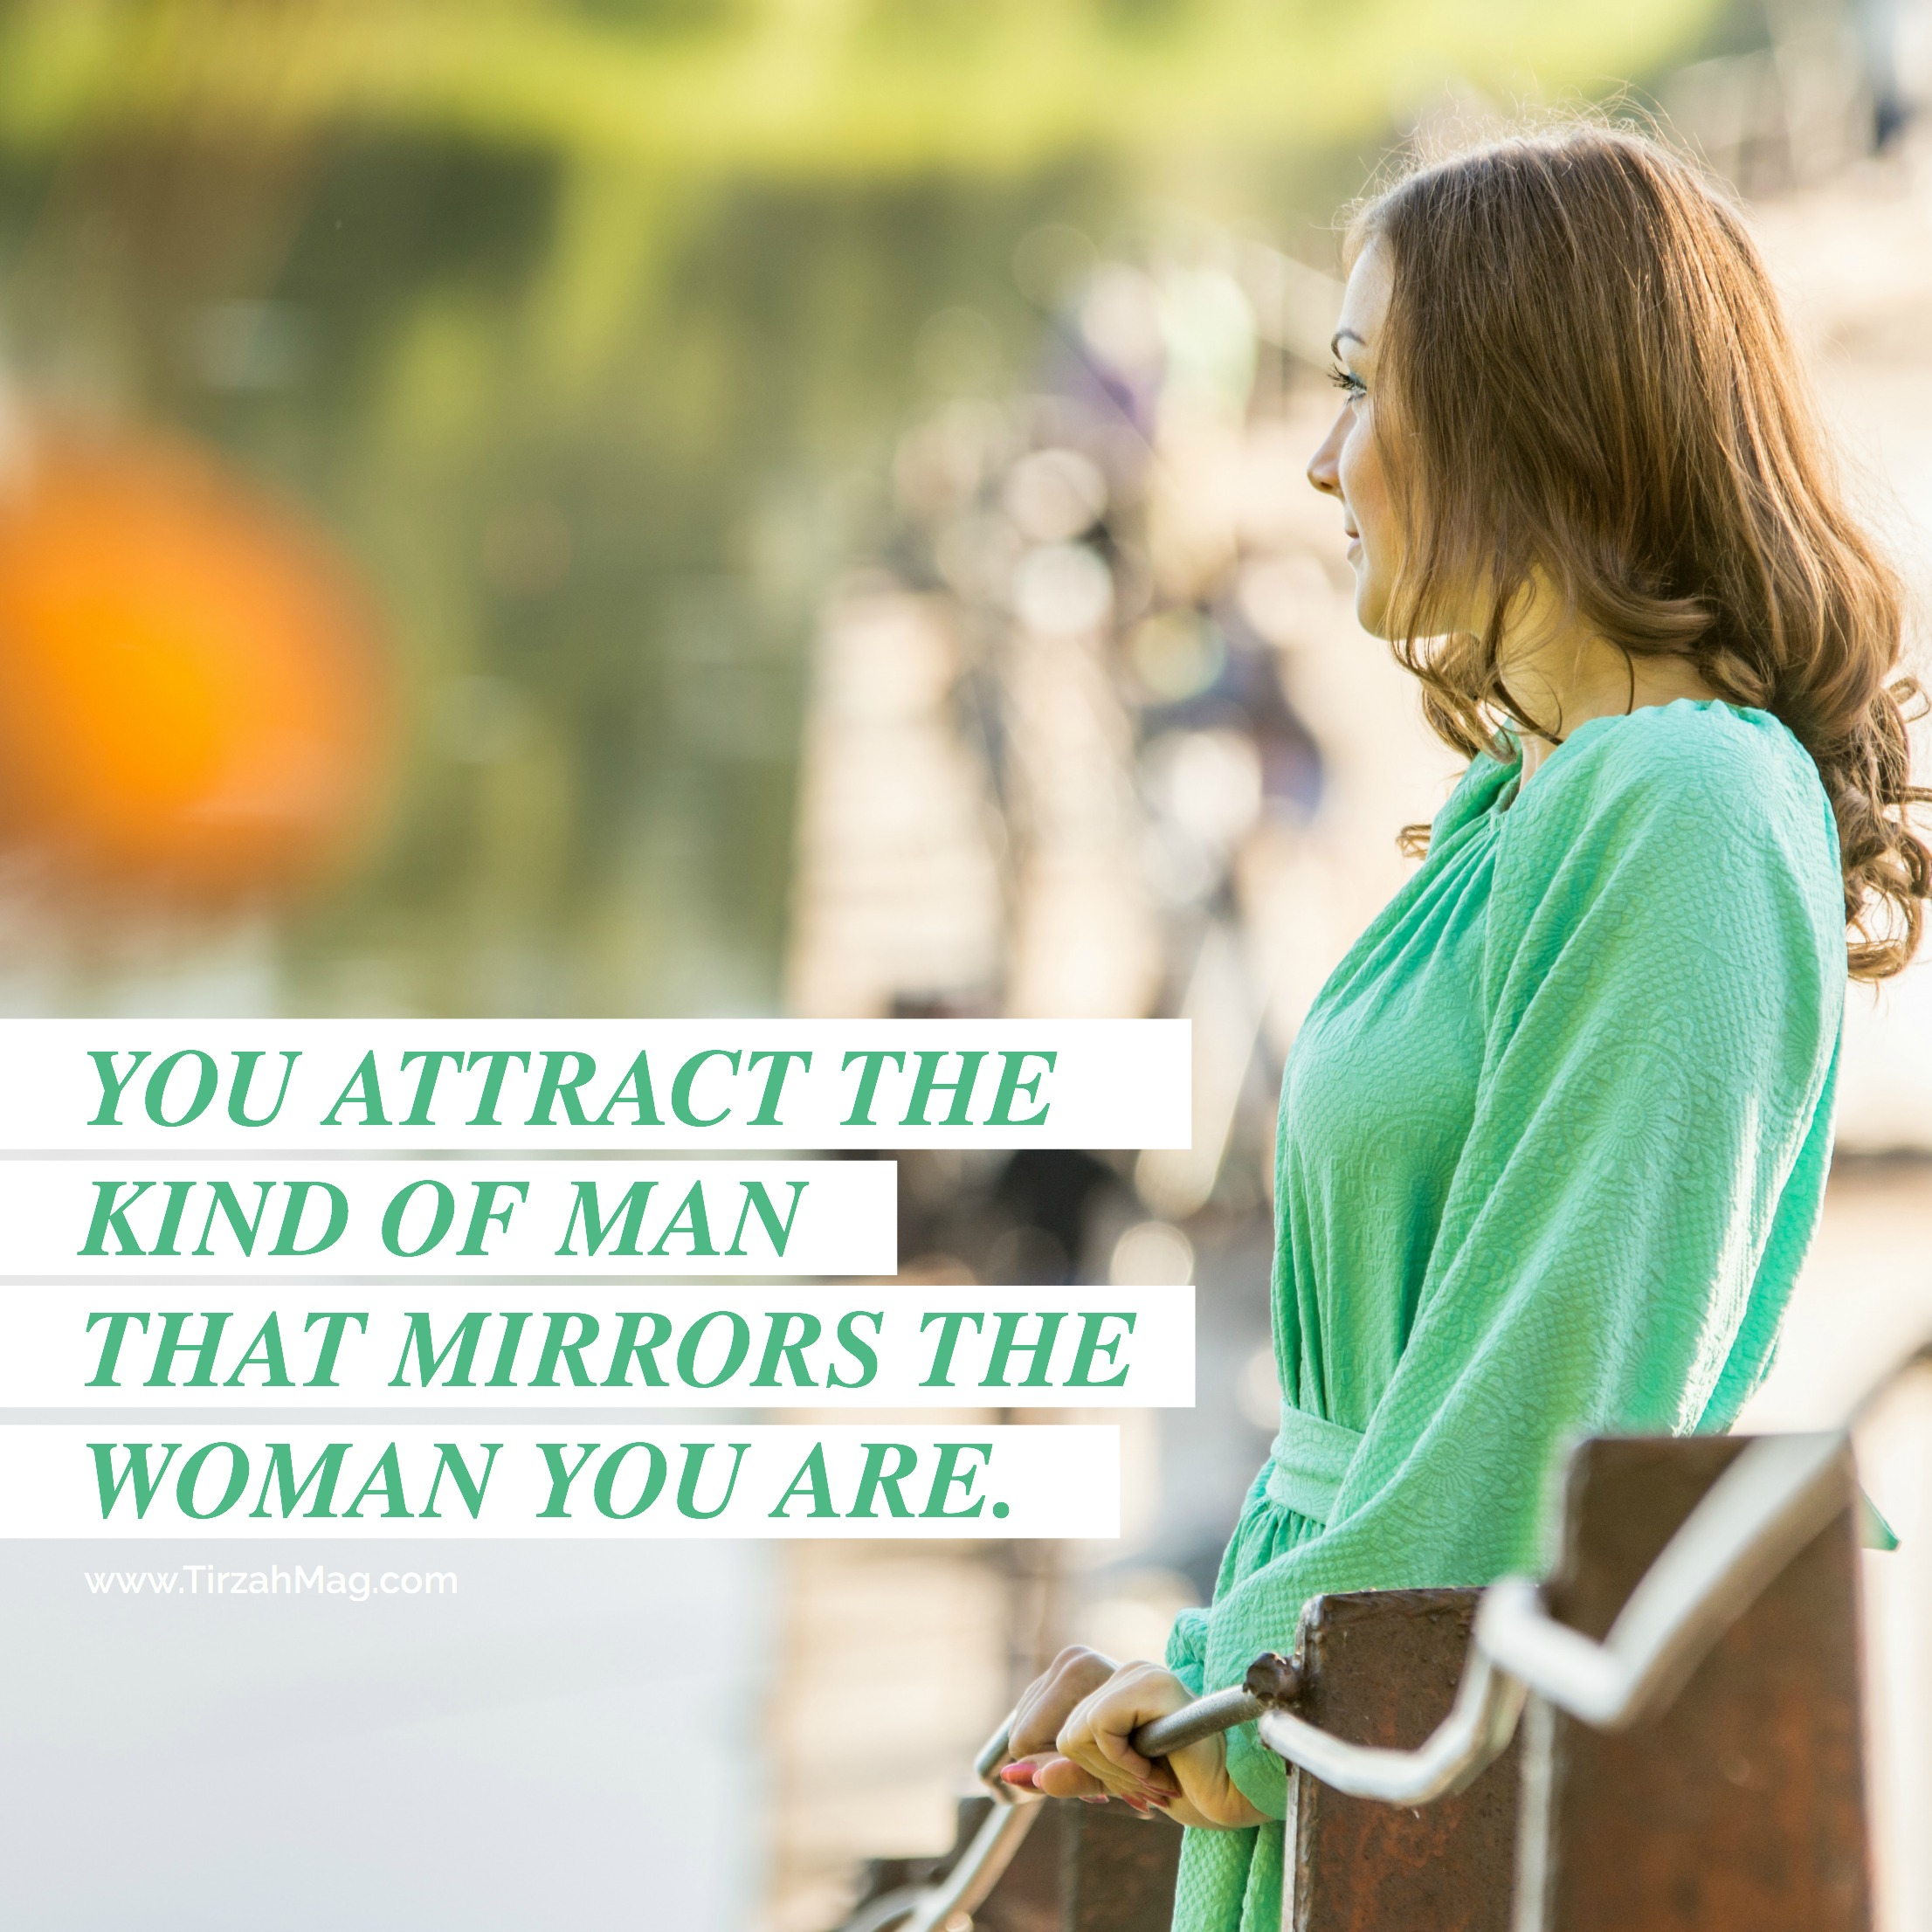 Don't settle! Find the man worthy of a woman like you